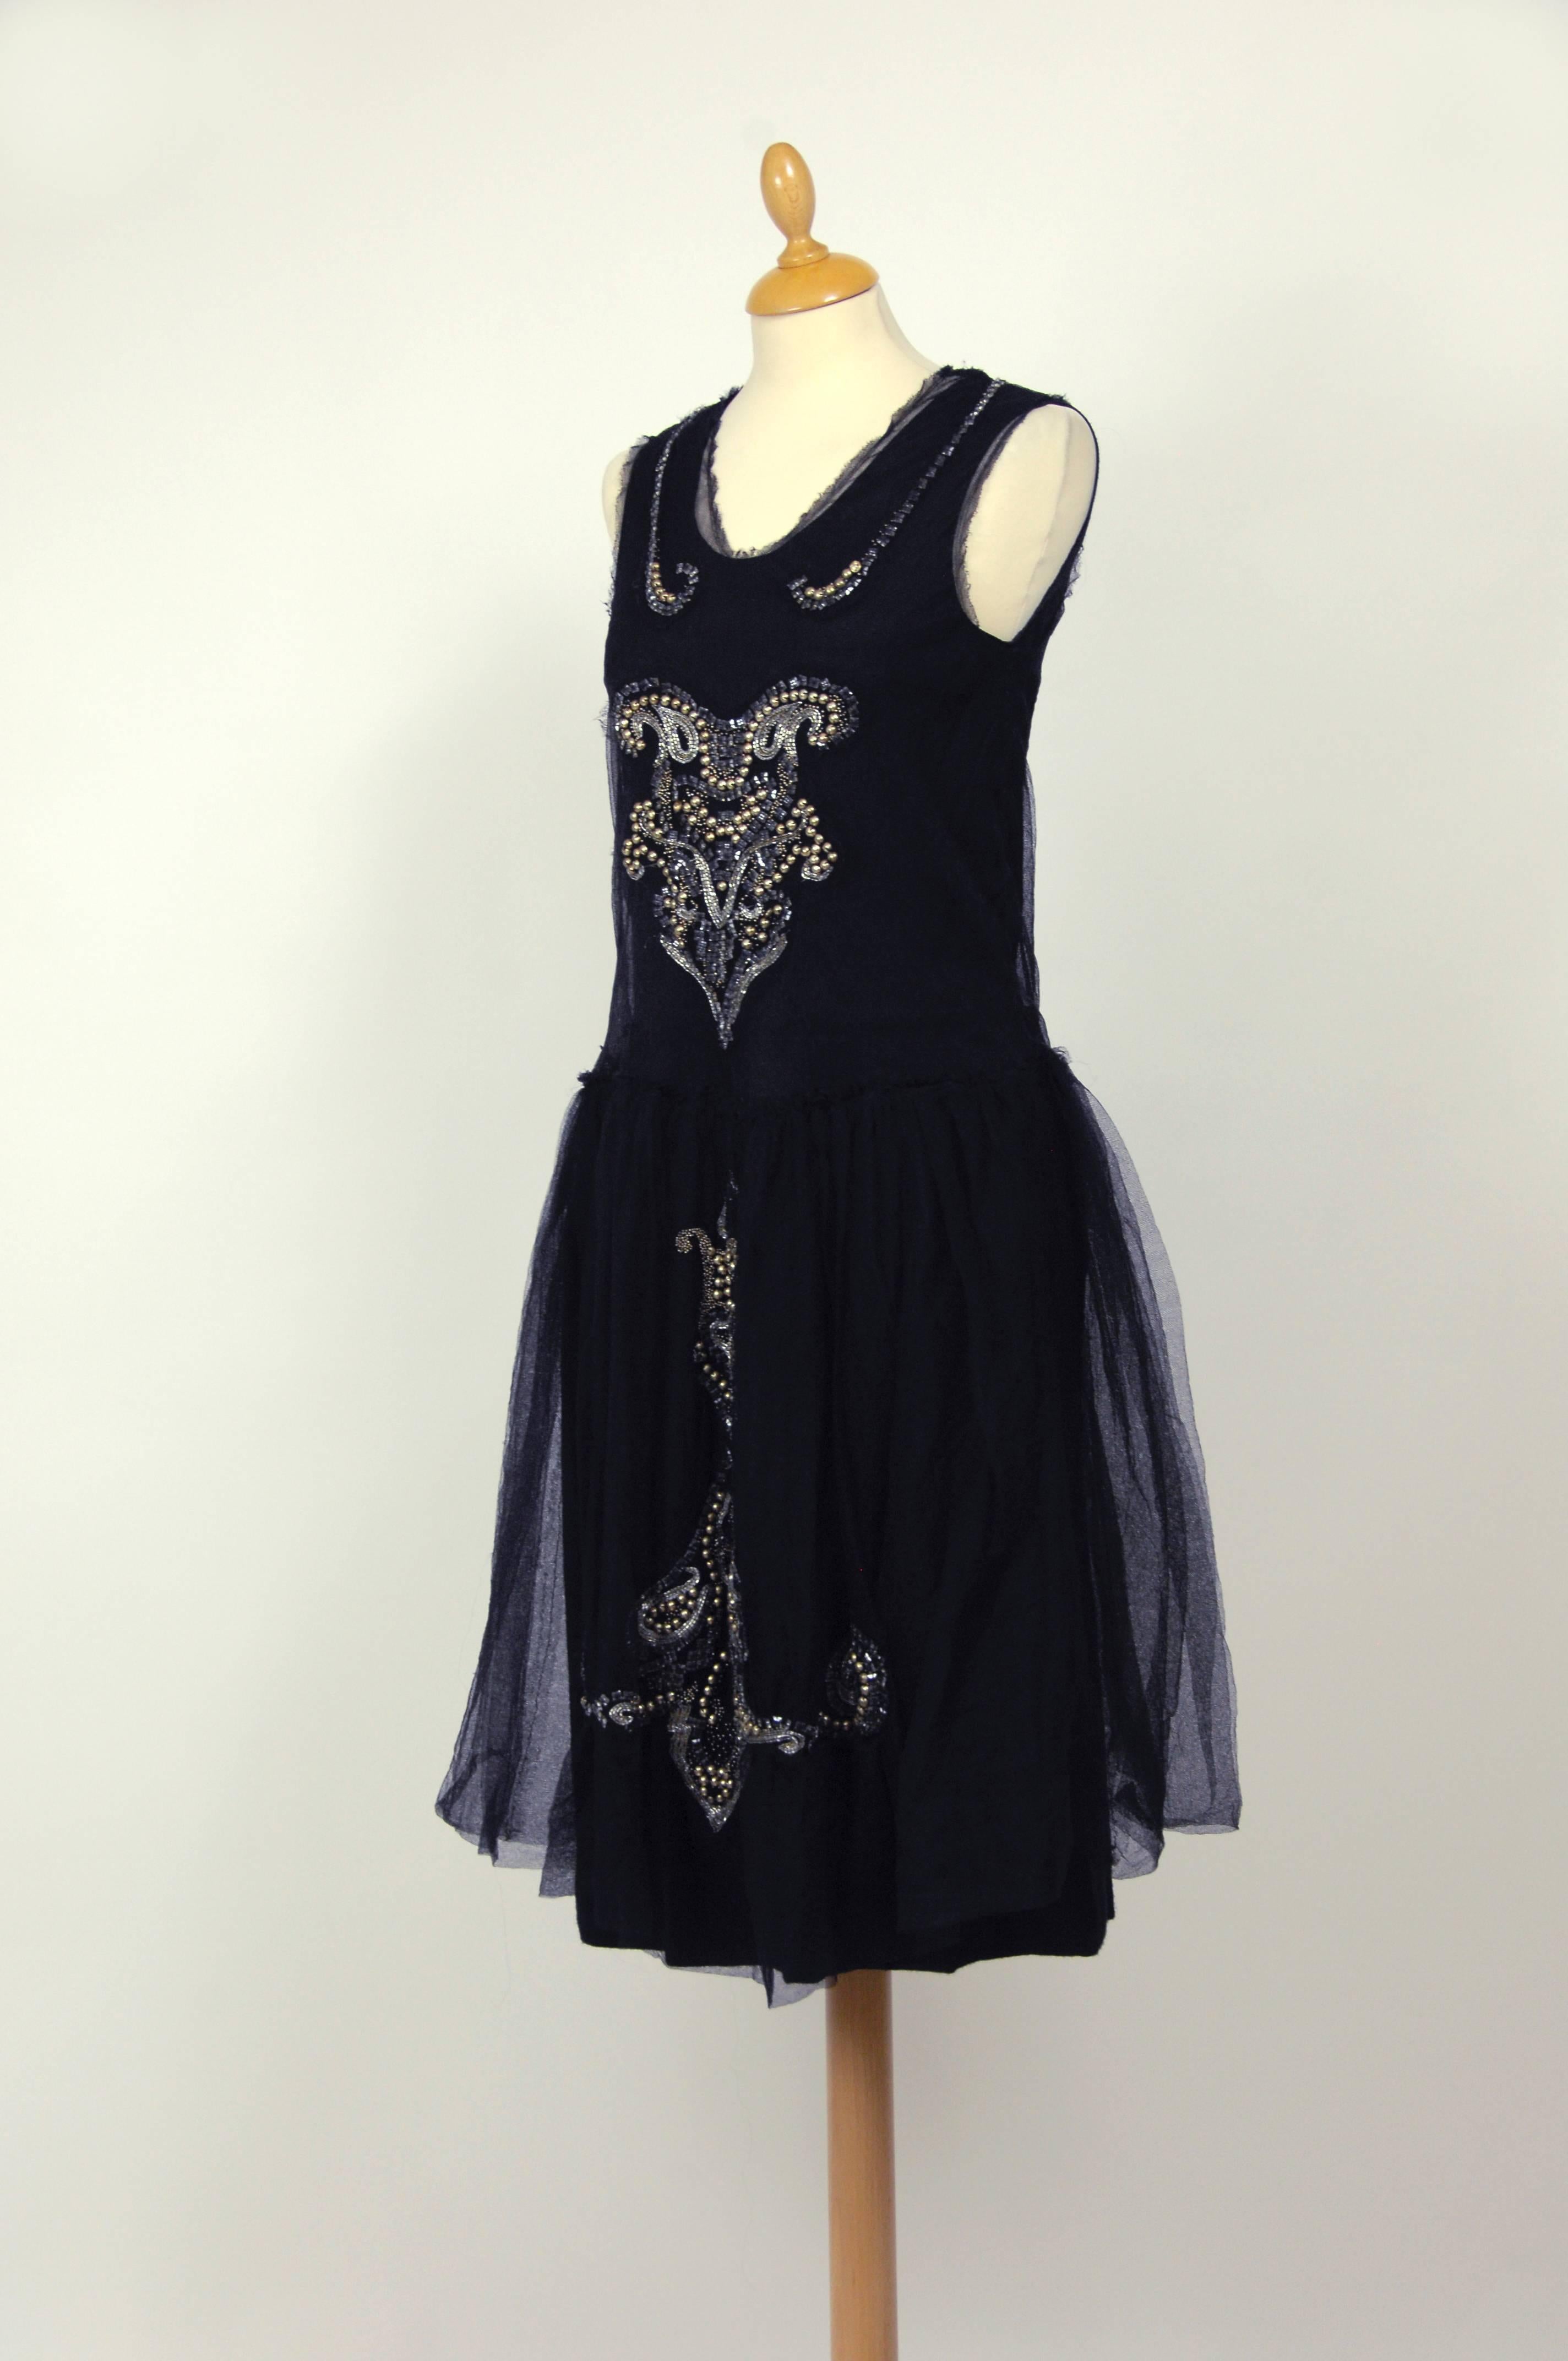 Lanvin Black Evening Dress In Excellent Condition For Sale In Milan, Italy